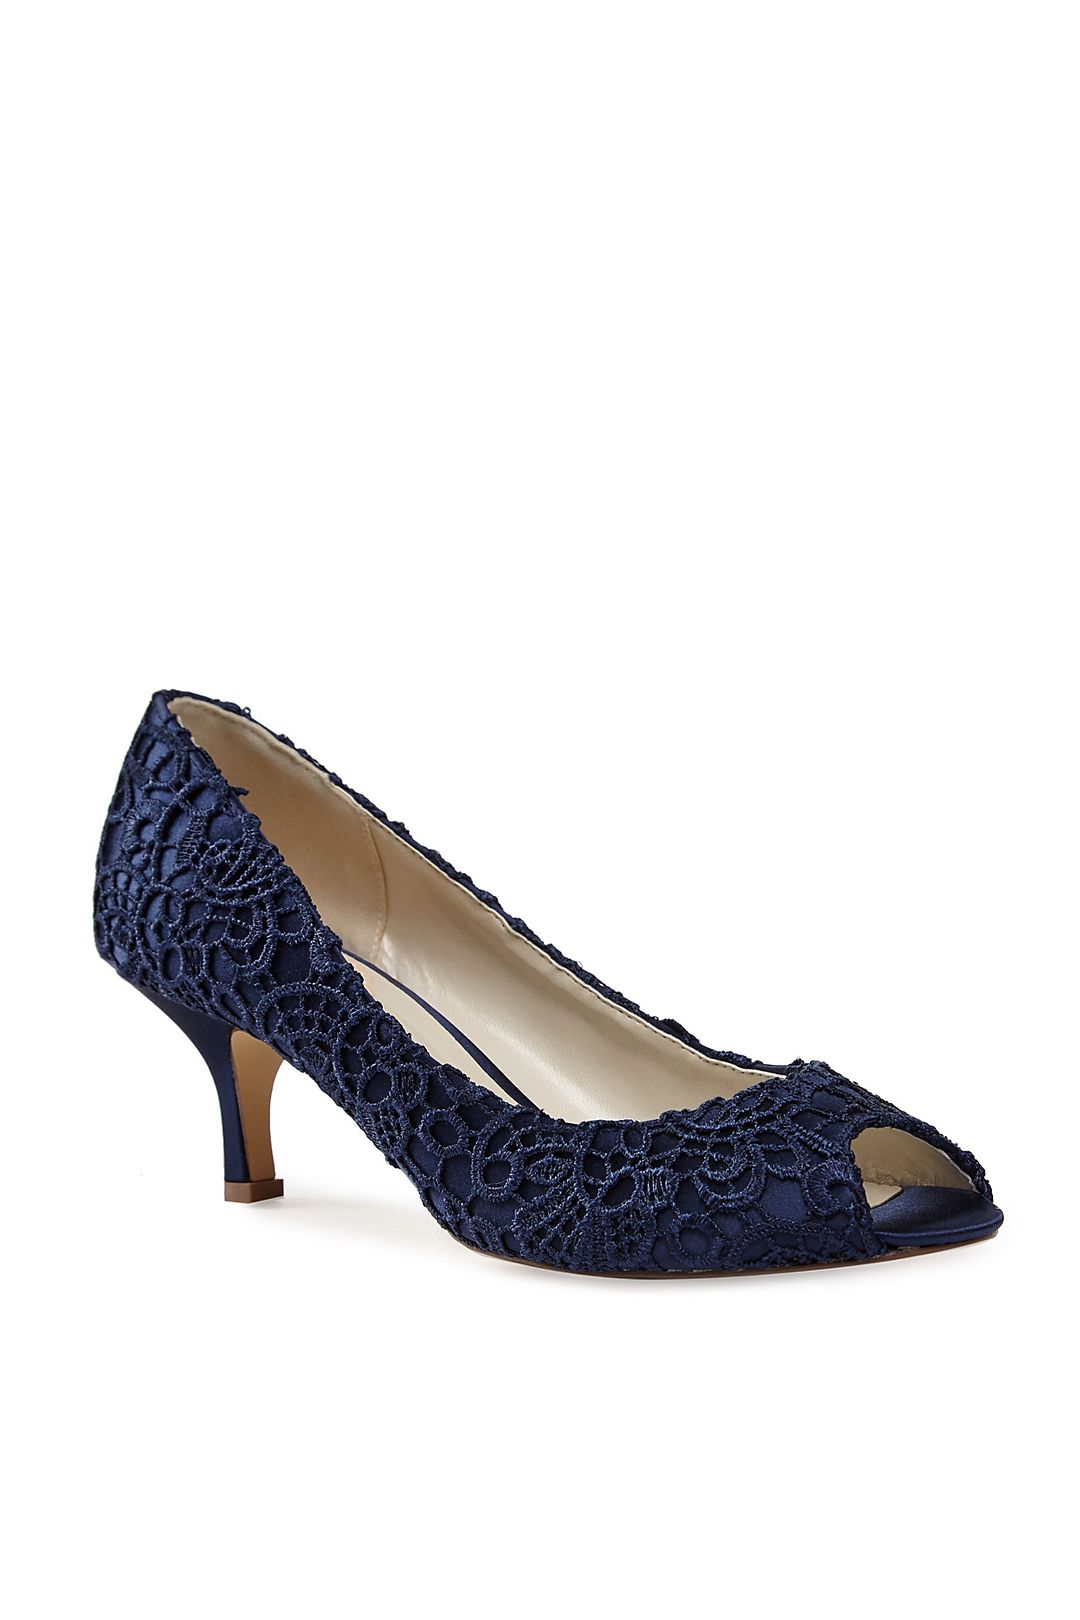 Guipure Lace and Satin Peep-Toe Pumps Image 1